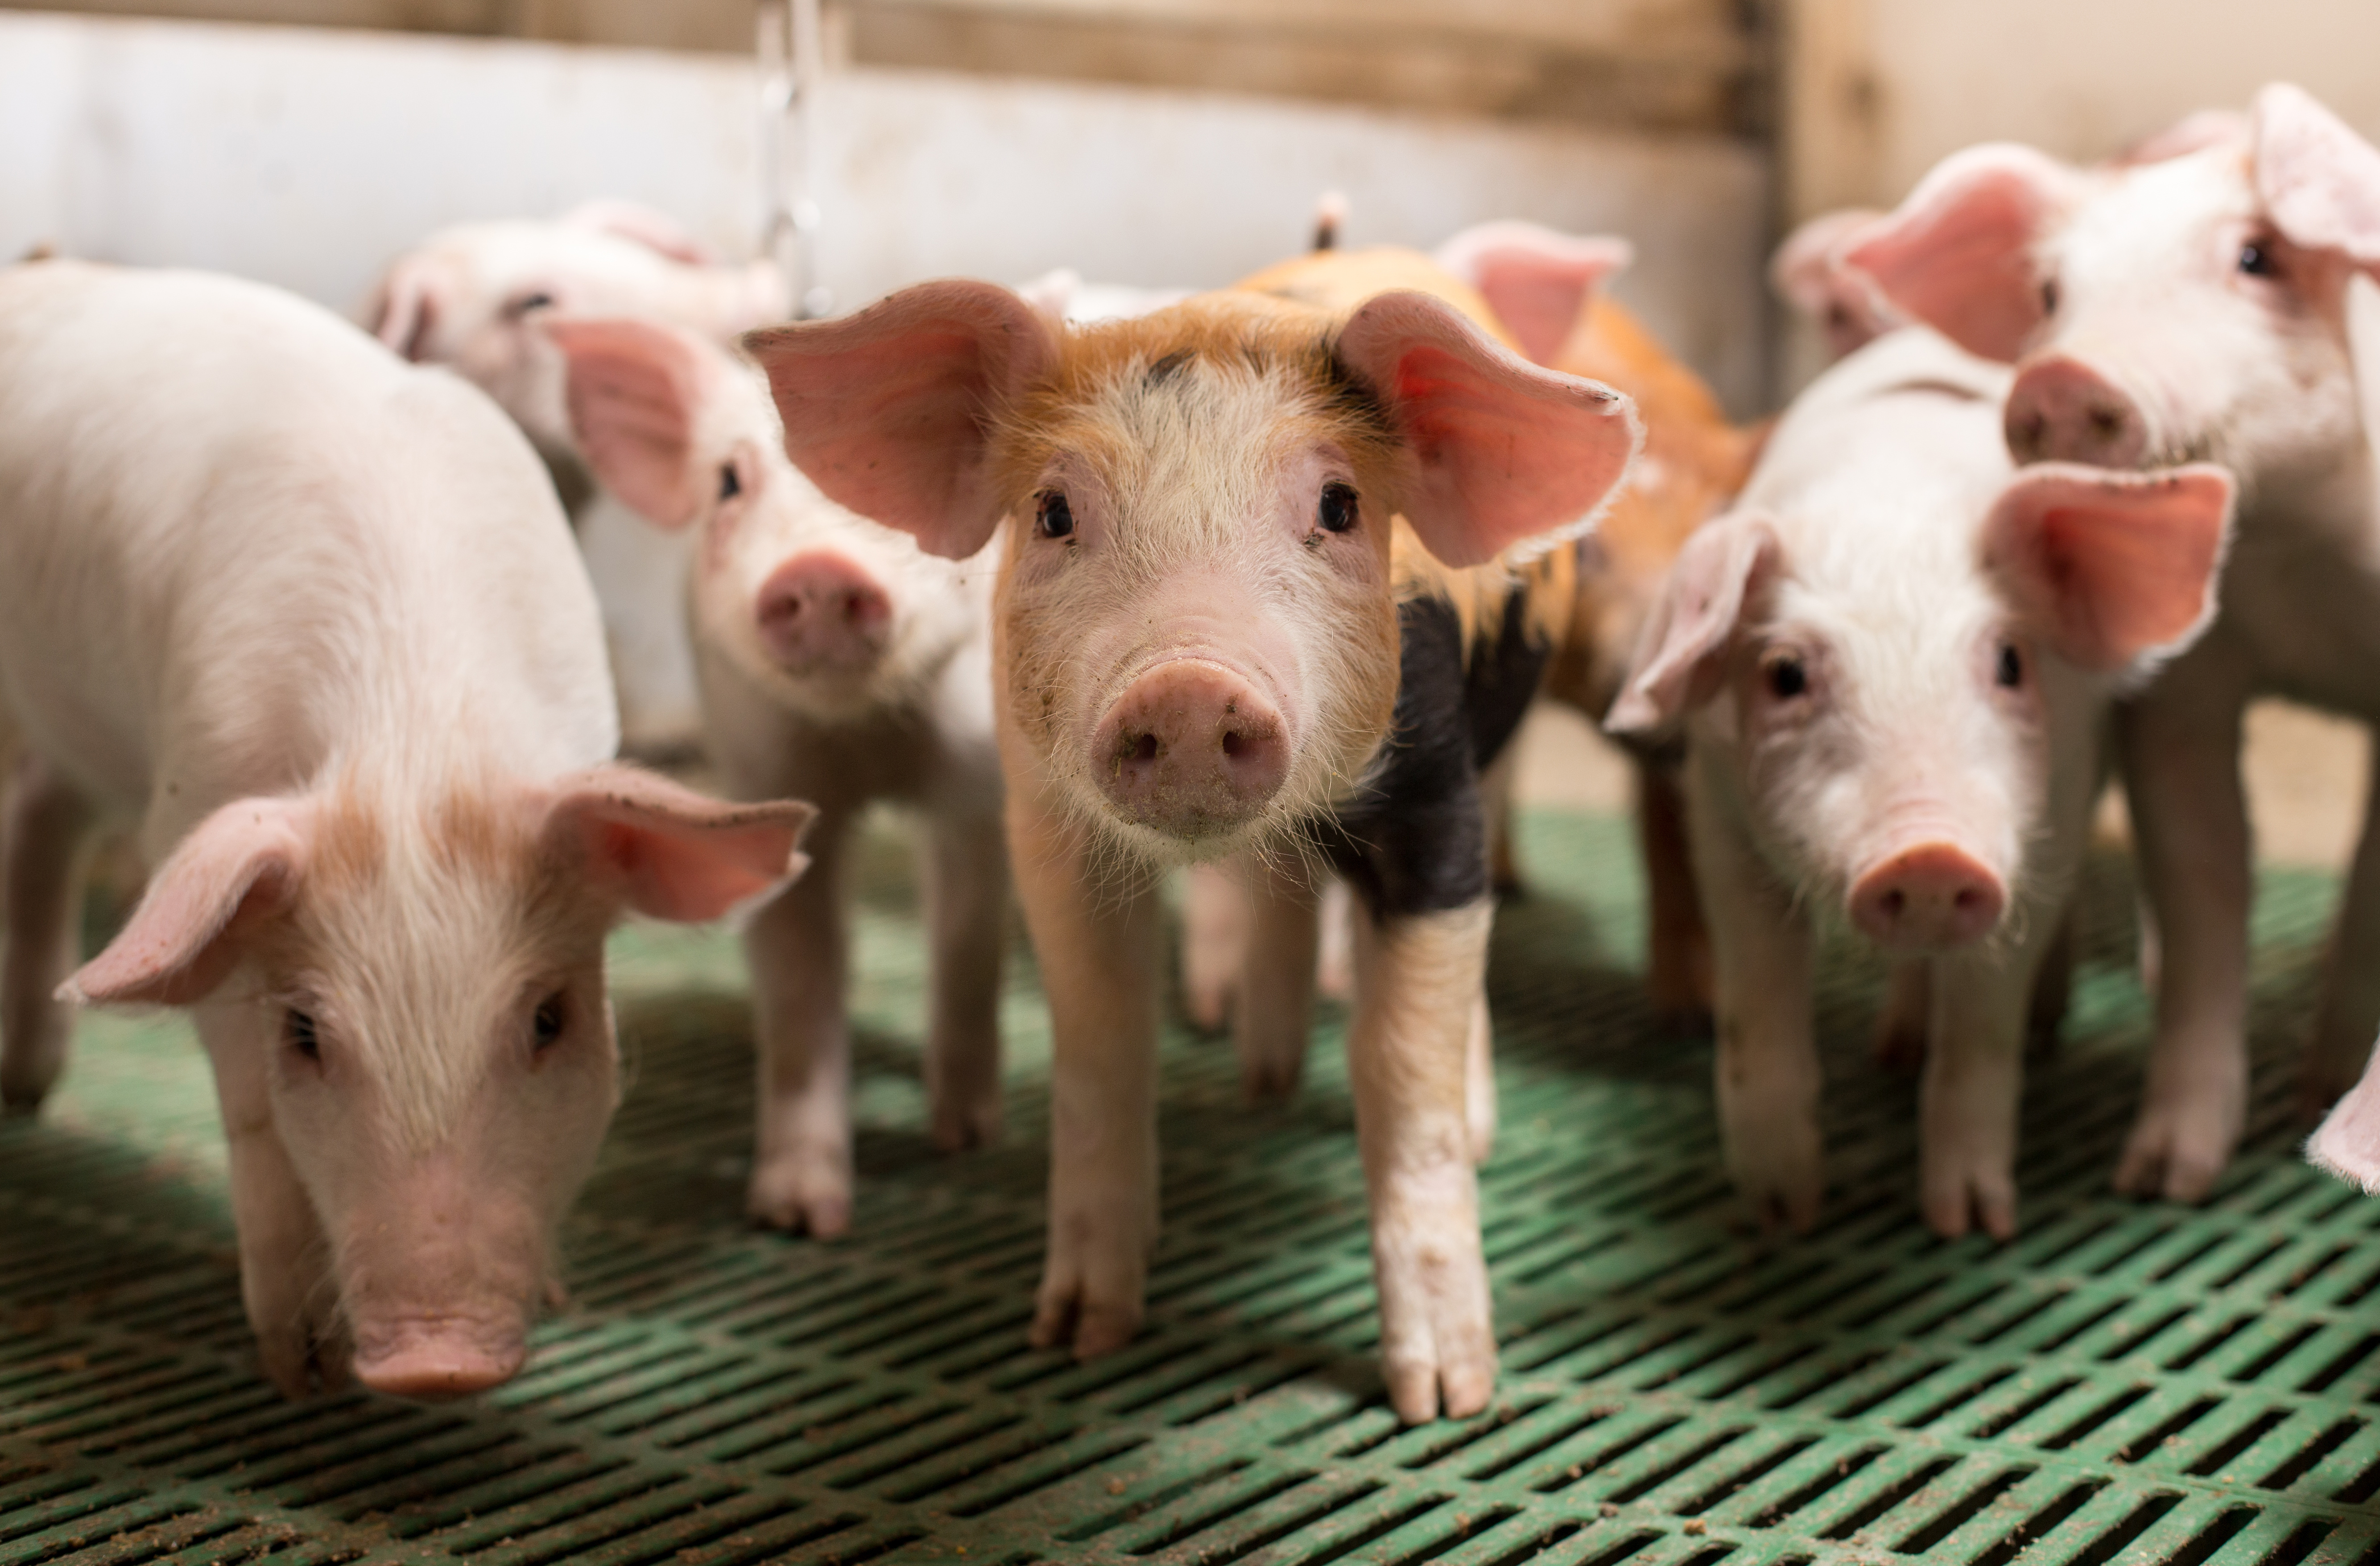 piglets on a slatted floor staring at the camera